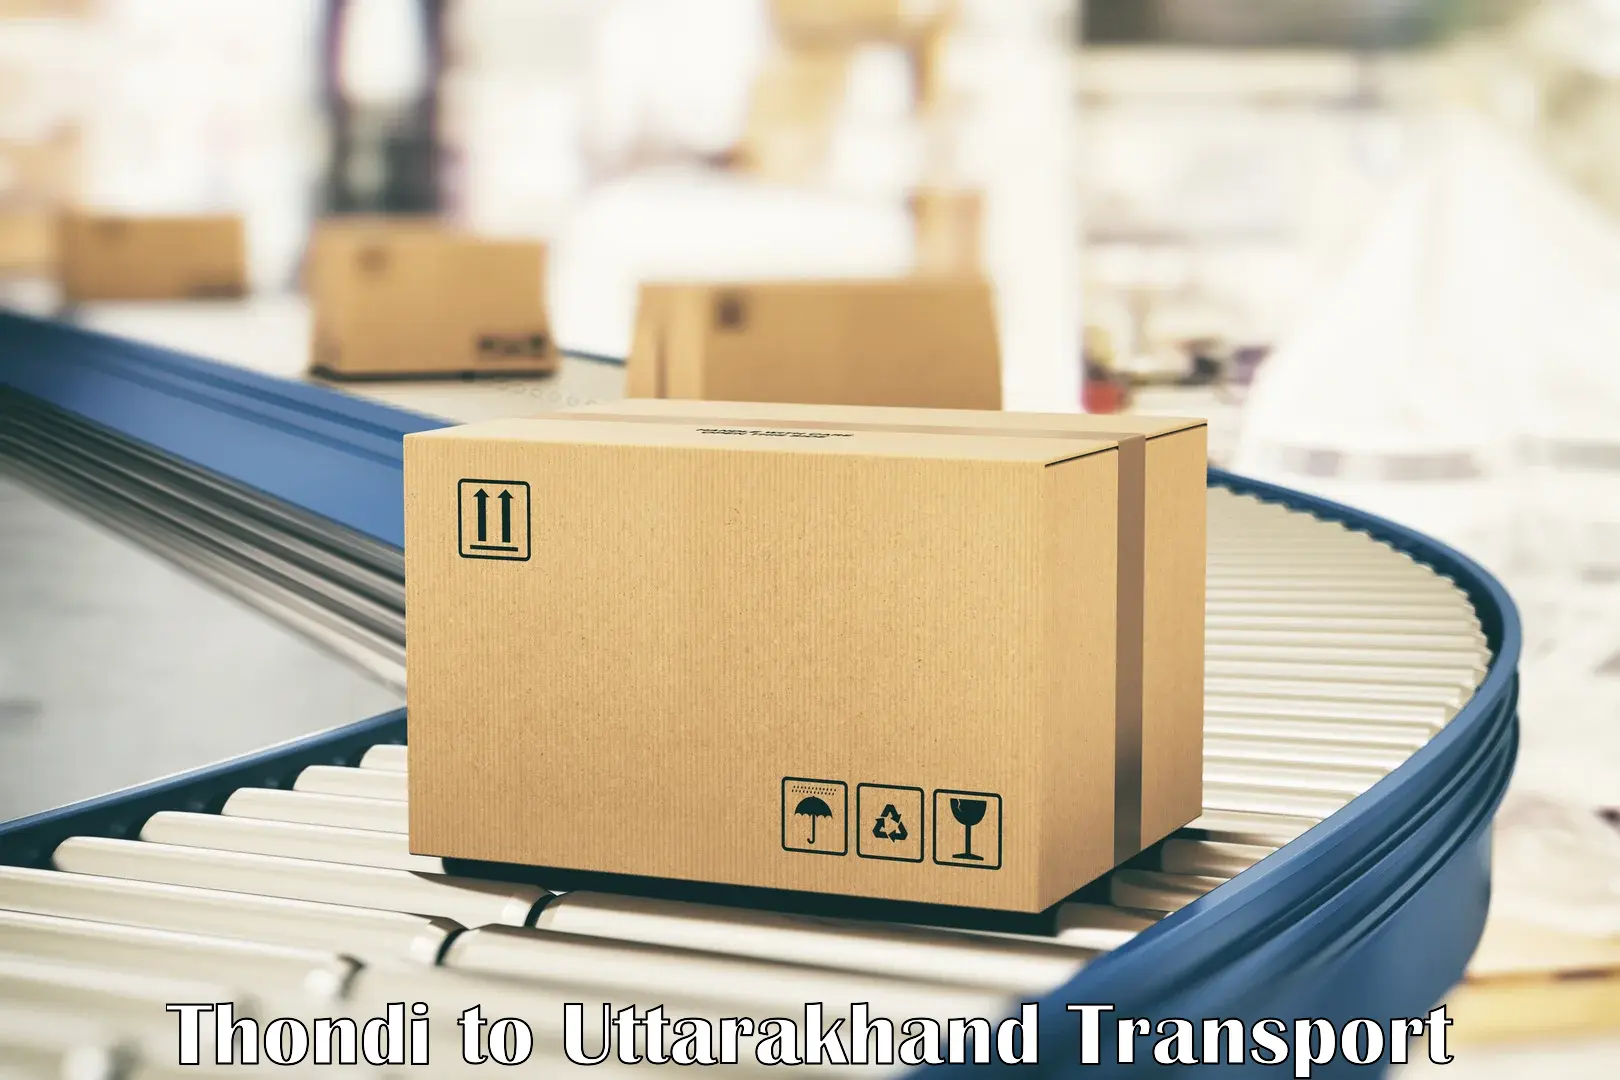 Domestic goods transportation services Thondi to IIT Roorkee